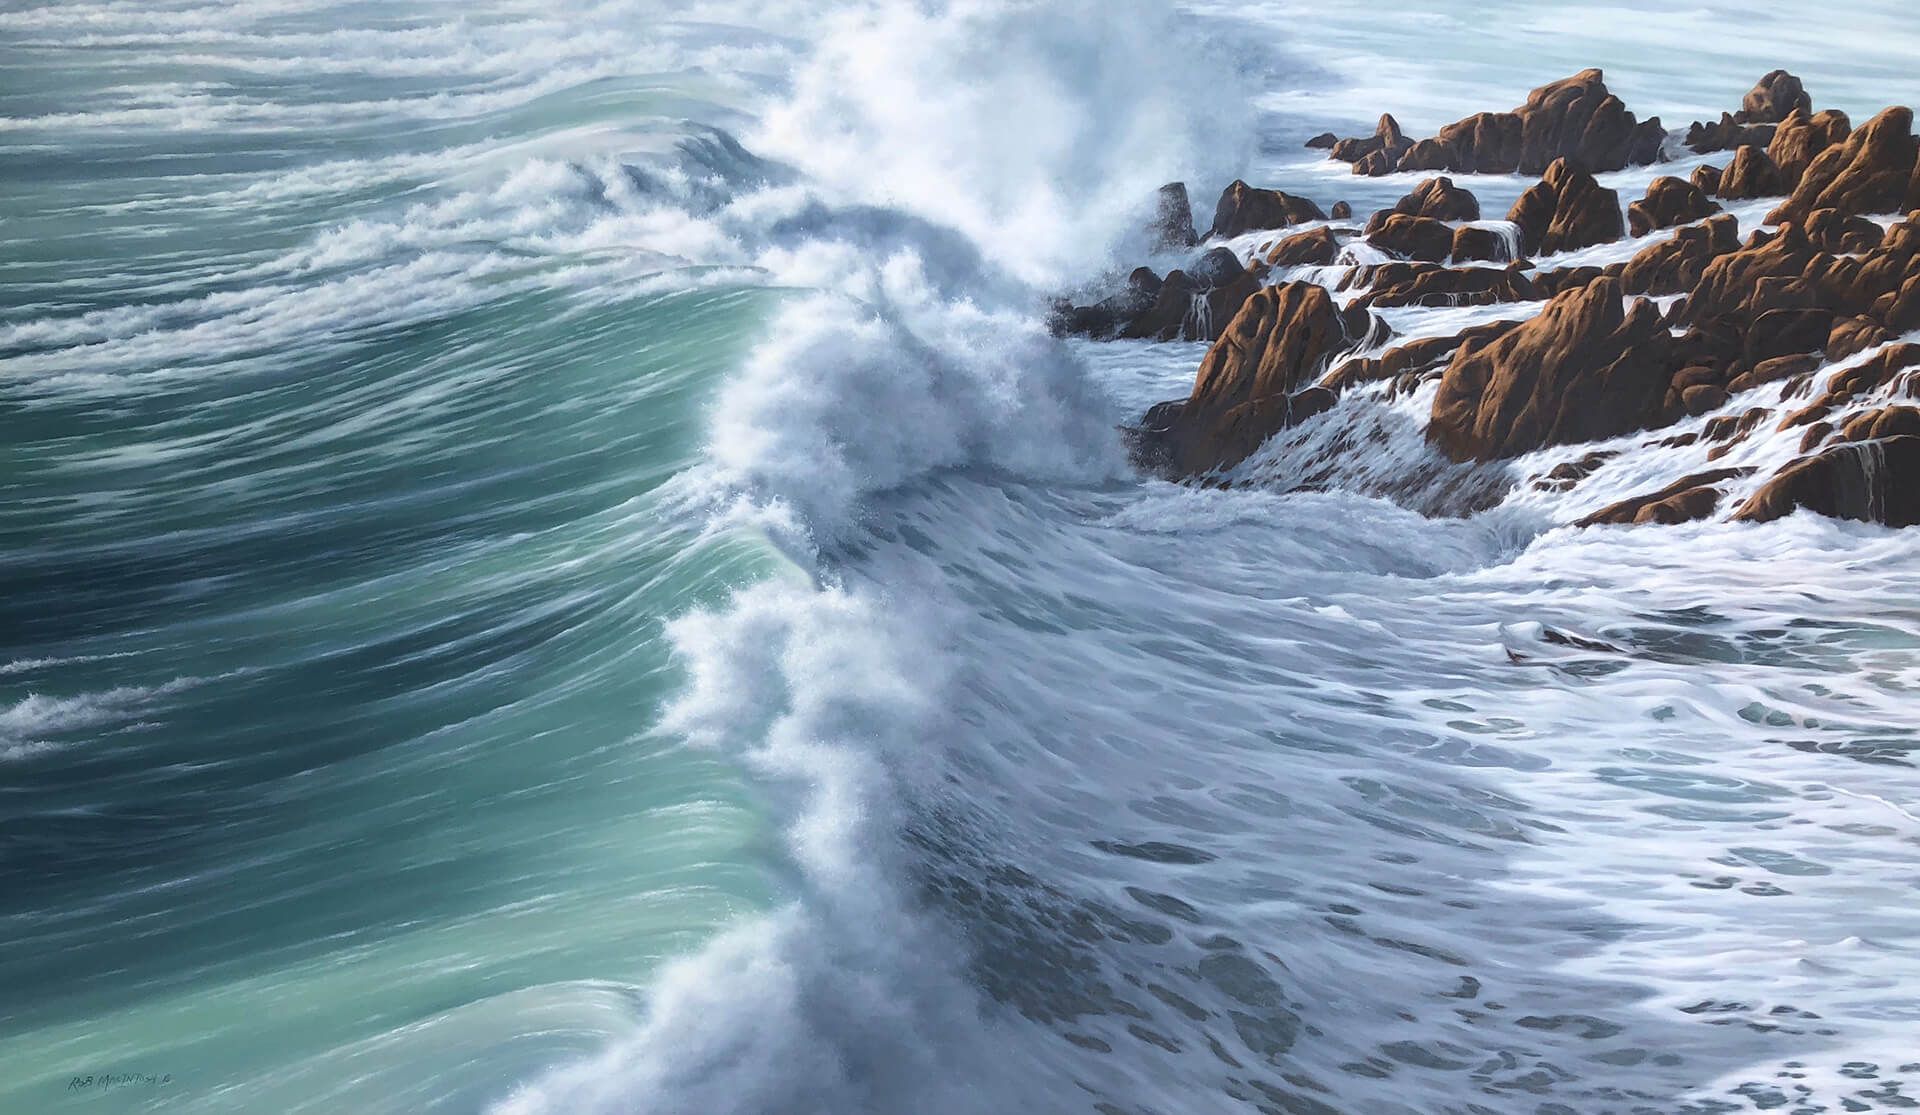 Photorealistic painting of the coast at Blowing Rocks